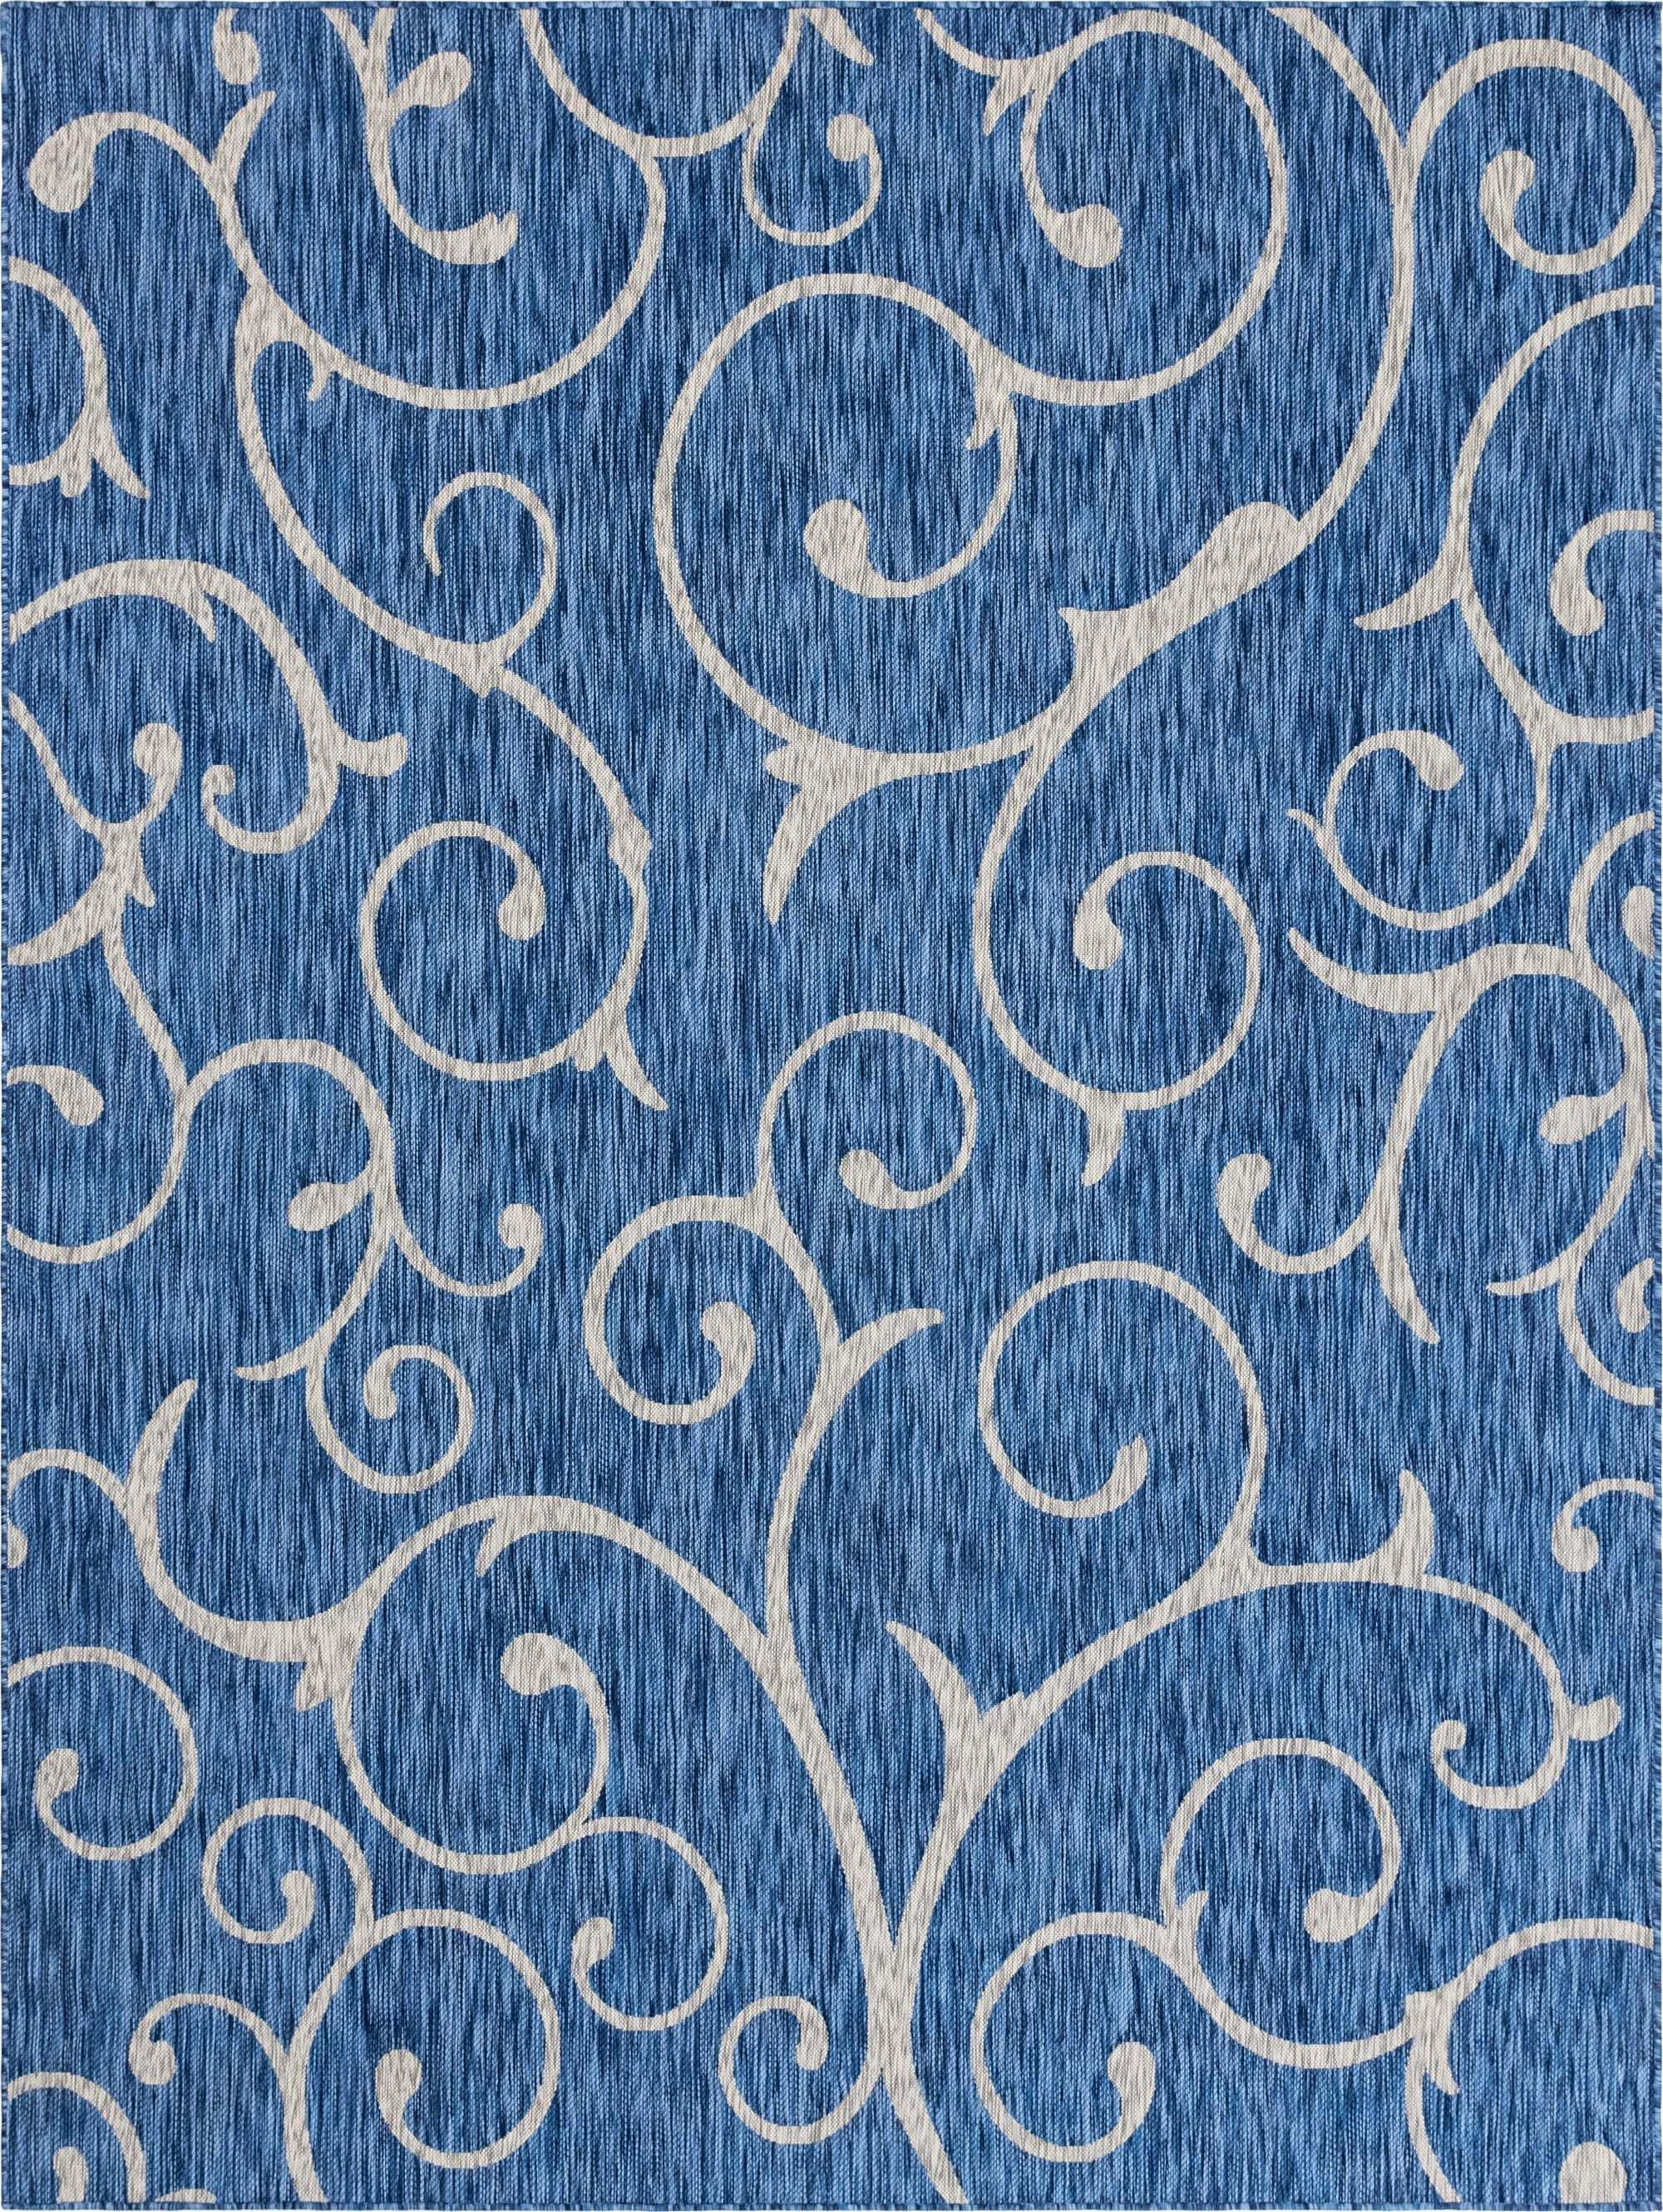 Unique Loom Outdoor Rugs - Outdoor Botanical Damask Rectangular 9x12 Rug Blue & Gray